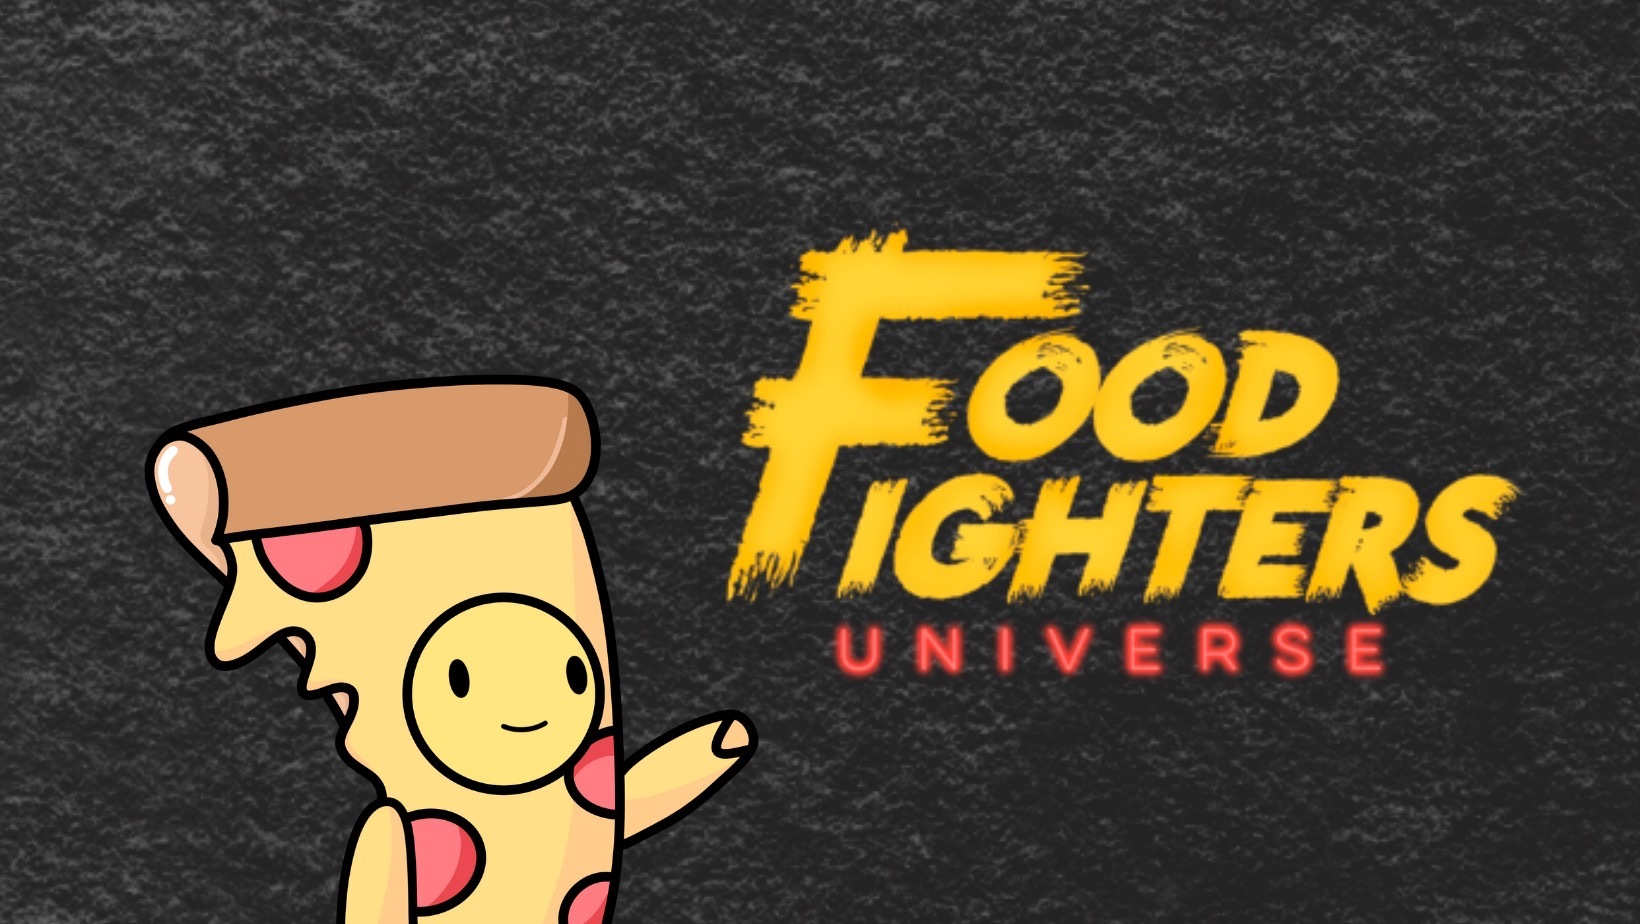 Cartoony logo of Food Fighters Universe with a pizza cartoon.